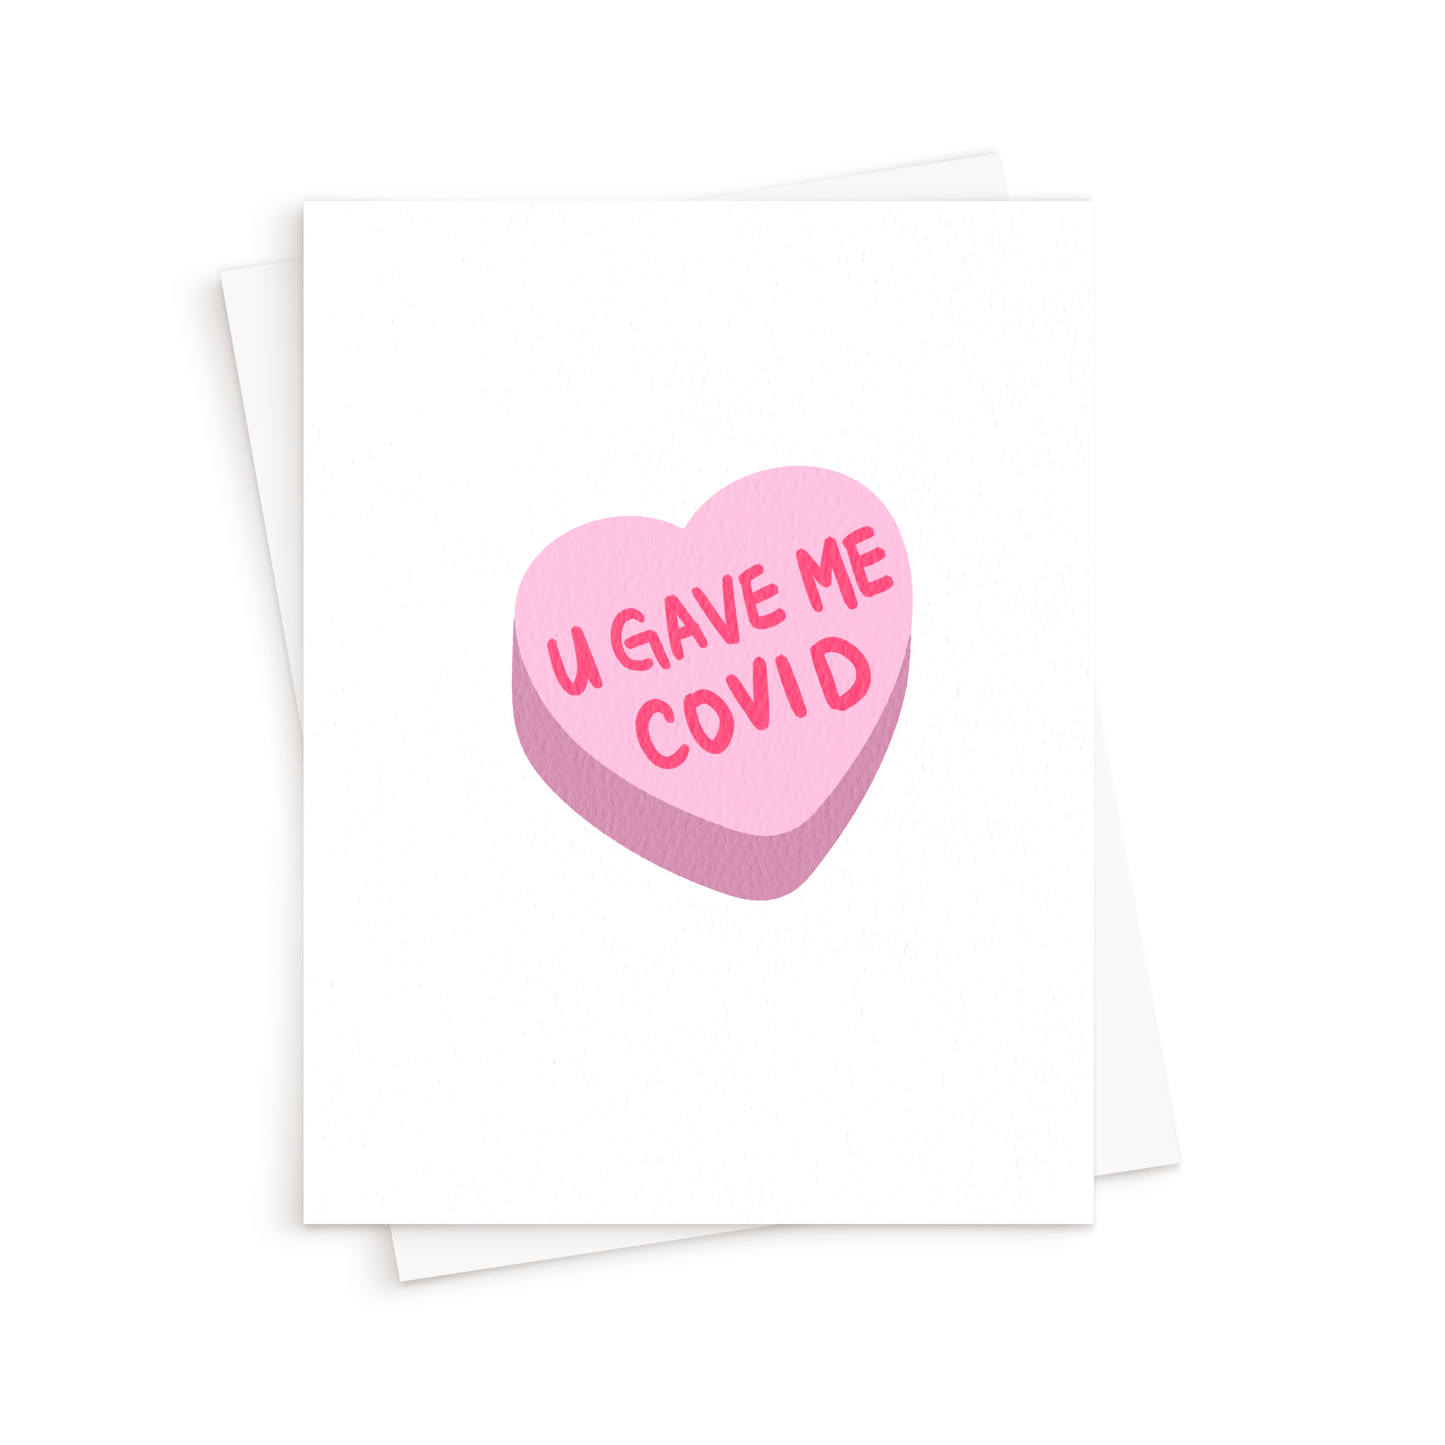 The COVID Candy Heart Card. You Gave Me COVID Card.